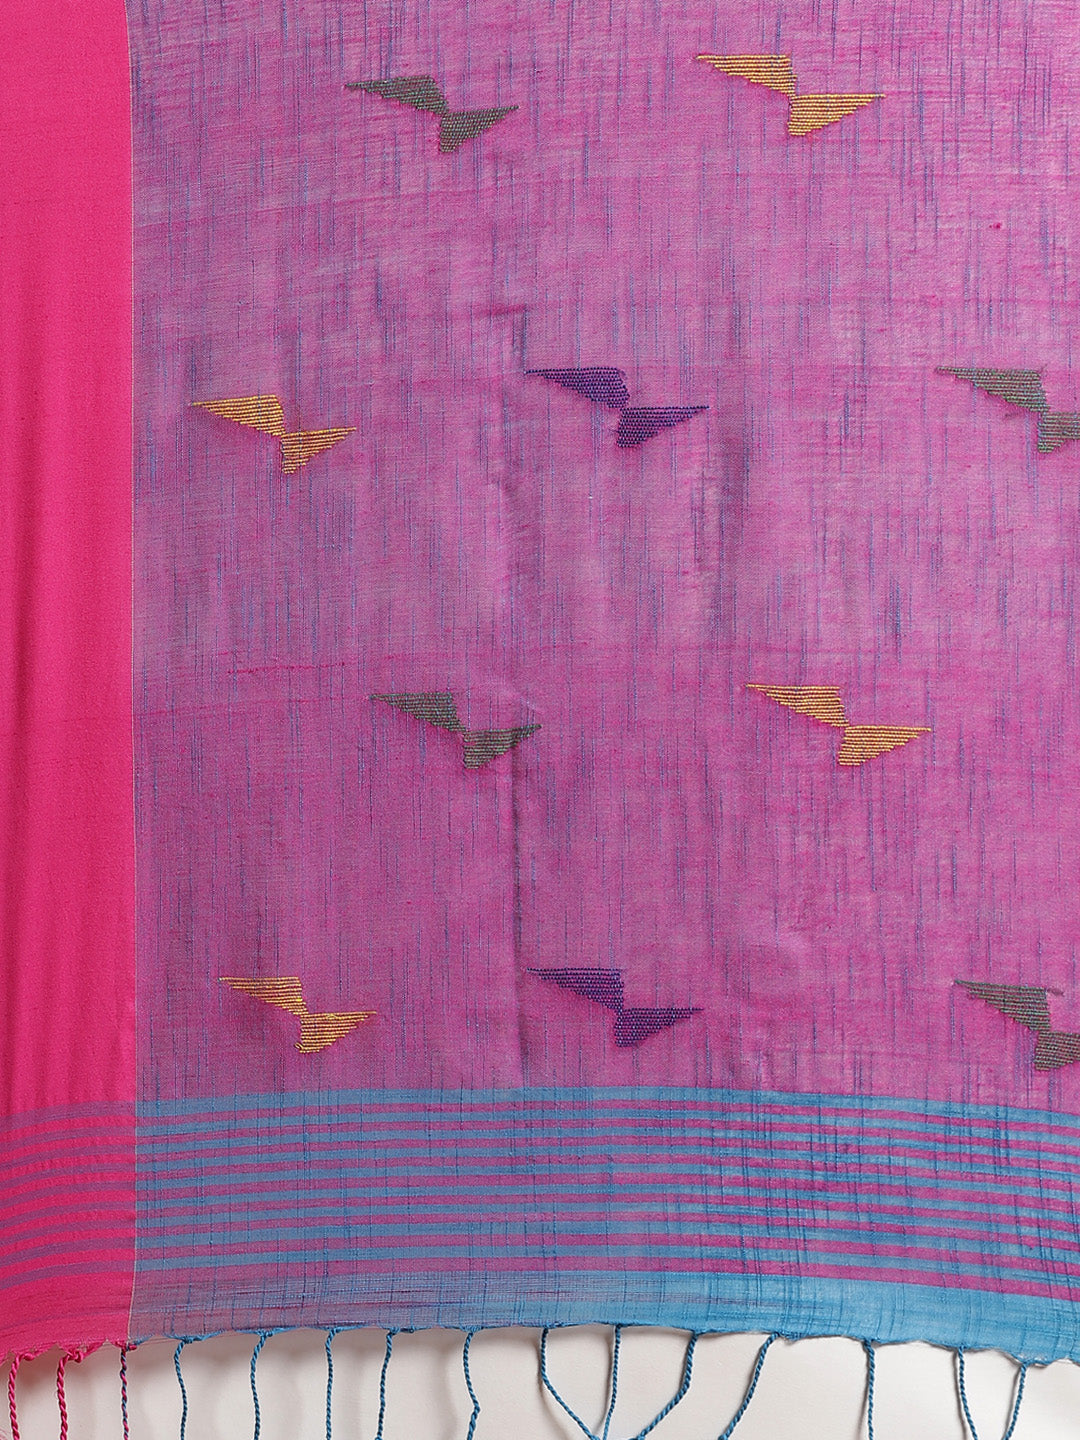 Blue and Purple, Kalakari India Cotton Blue Hand crafted saree with blouse SHBESA0006-Saree-Kalakari India-SHBESA0006-Bengal, Cotton, Geographical Indication, Hand Crafted, Heritage Prints, Ikkat, Natural Dyes, Red, Sarees, Sustainable Fabrics, Woven, Yellow-[Linen,Ethnic,wear,Fashionista,Handloom,Handicraft,Indigo,blockprint,block,print,Cotton,Chanderi,Blue, latest,classy,party,bollywood,trendy,summer,style,traditional,formal,elegant,unique,style,hand,block,print, dabu,booti,gift,present,glamor